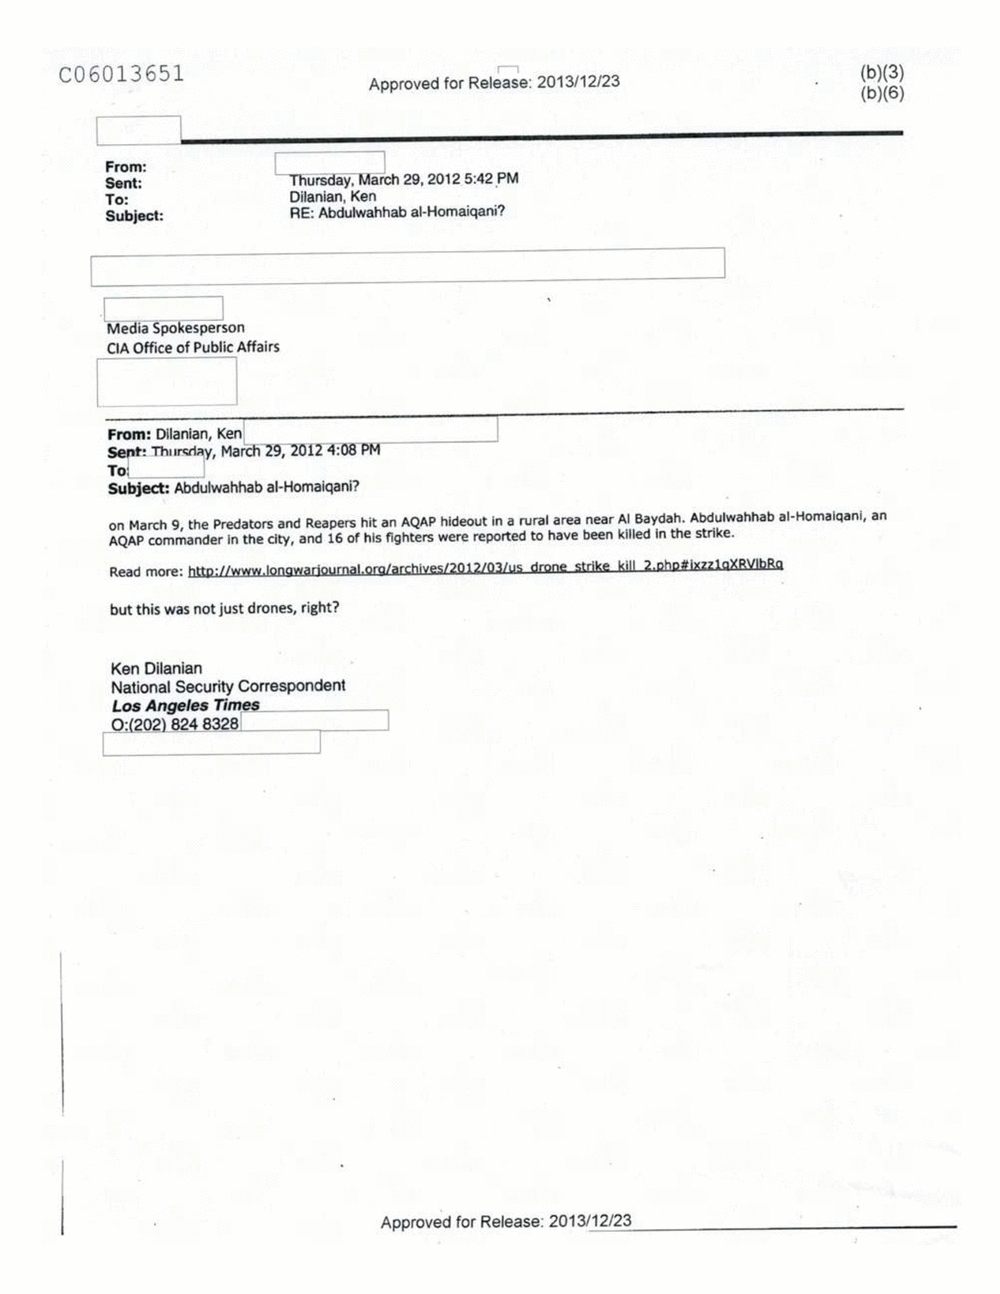 Page 502 from Email Correspondence Between Reporters and CIA Flacks